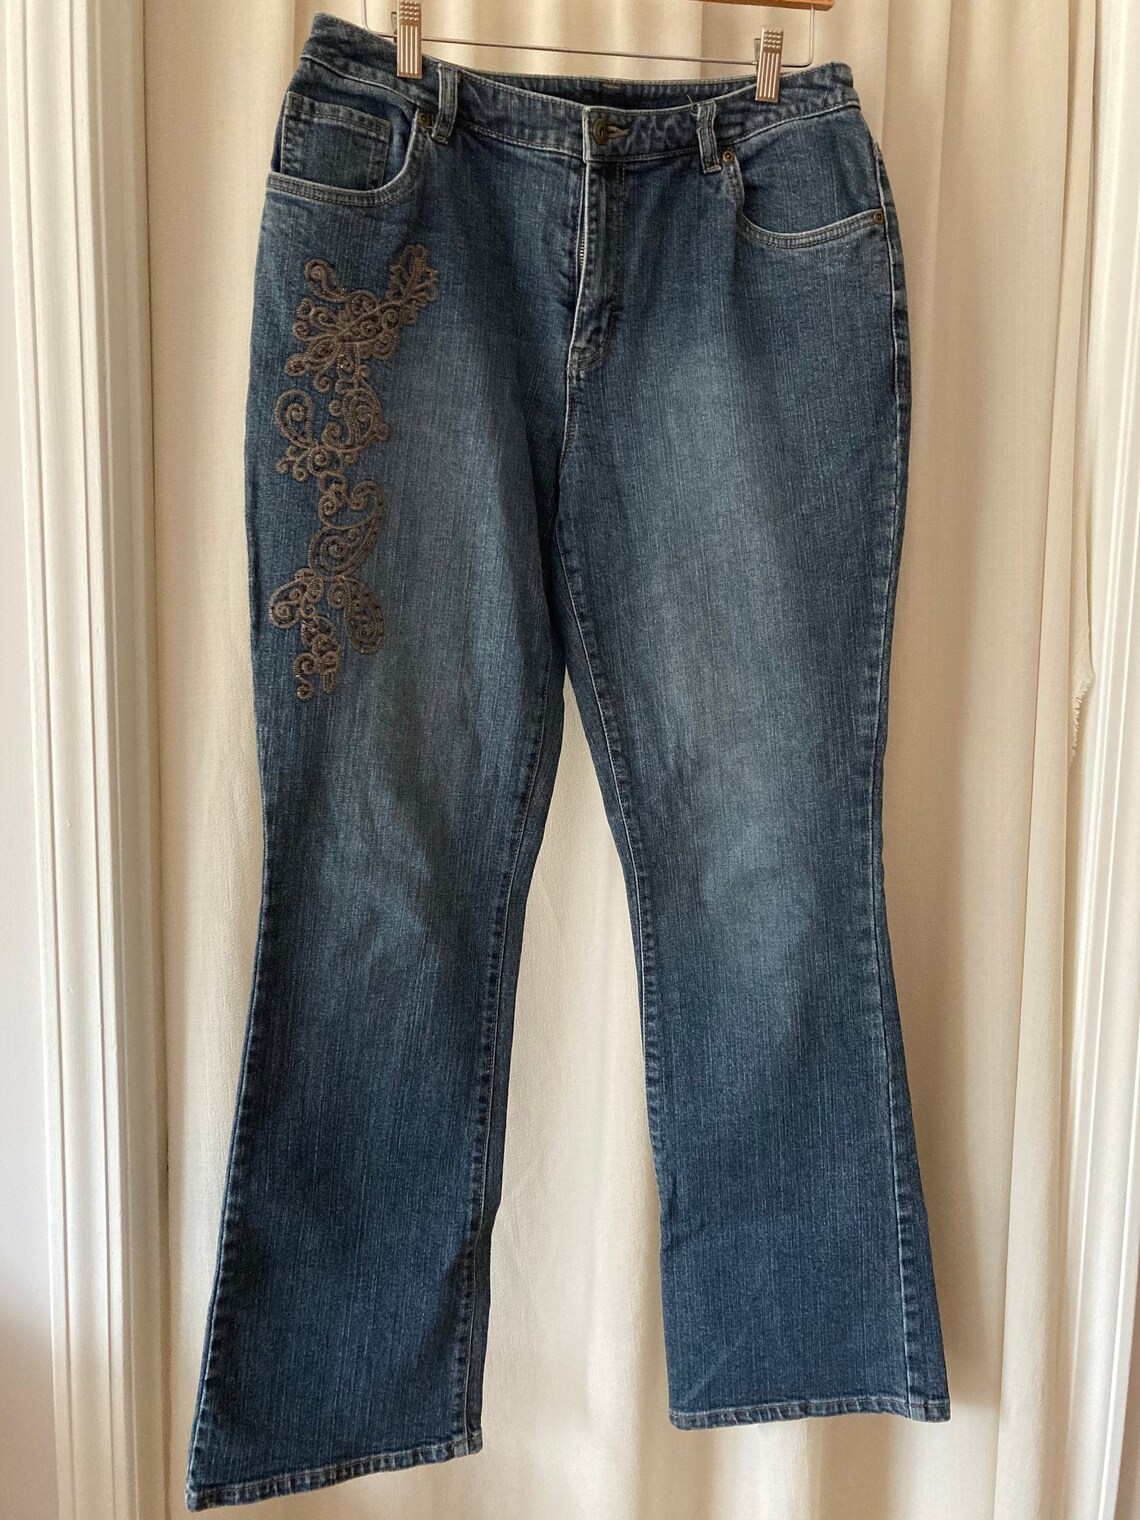 Y2k 2000s Vintage Motto Bootcut Jeans Paisley Embroidered - Etsy